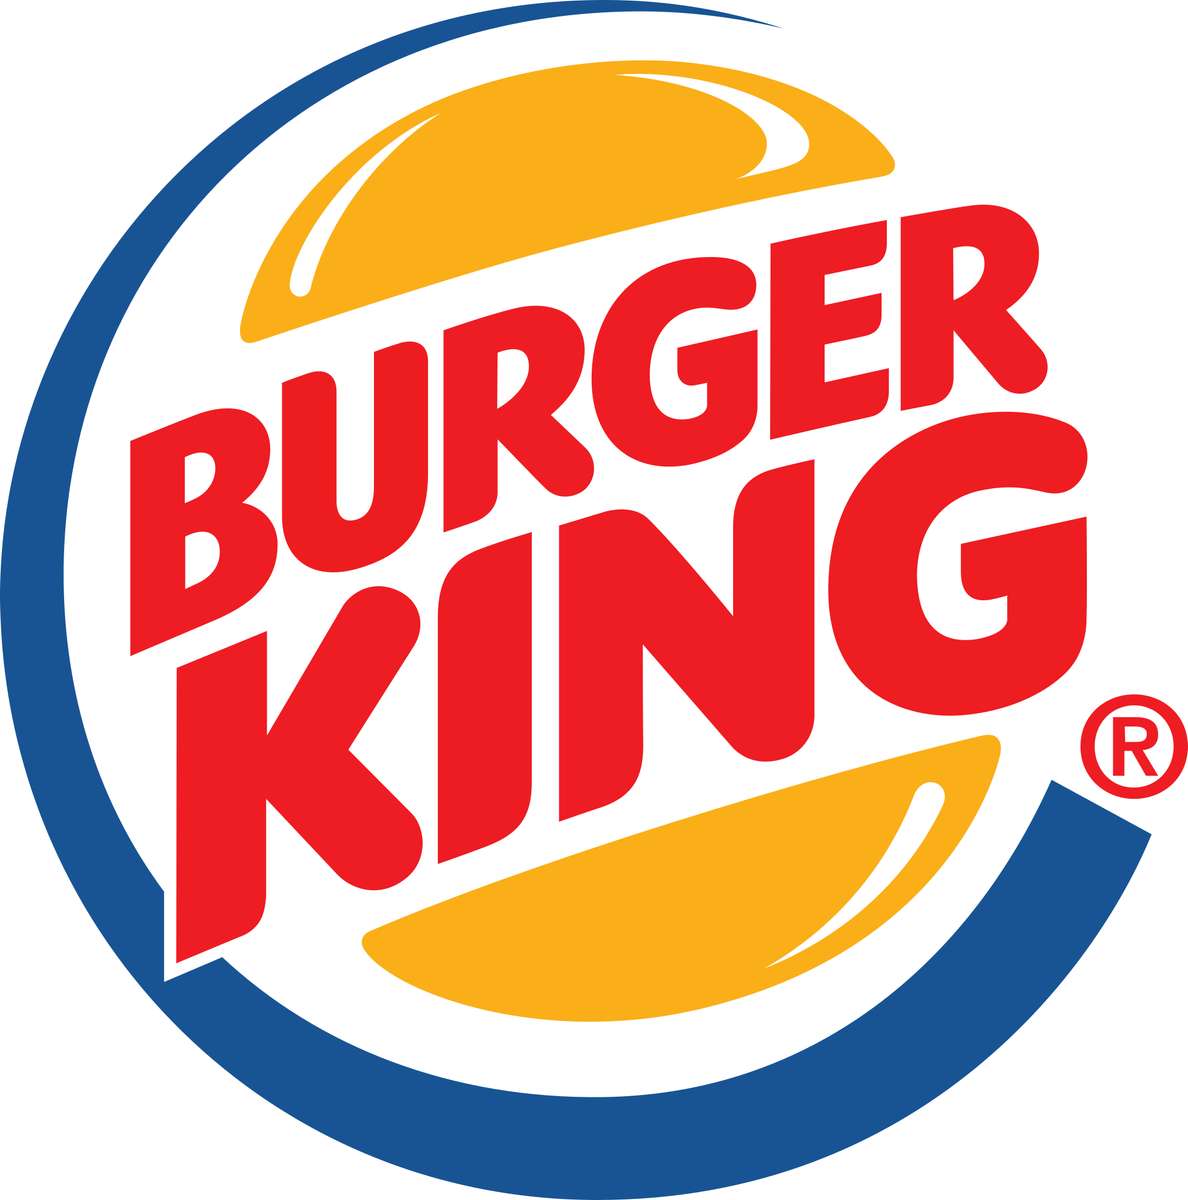 Burger king question puzzle online from photo